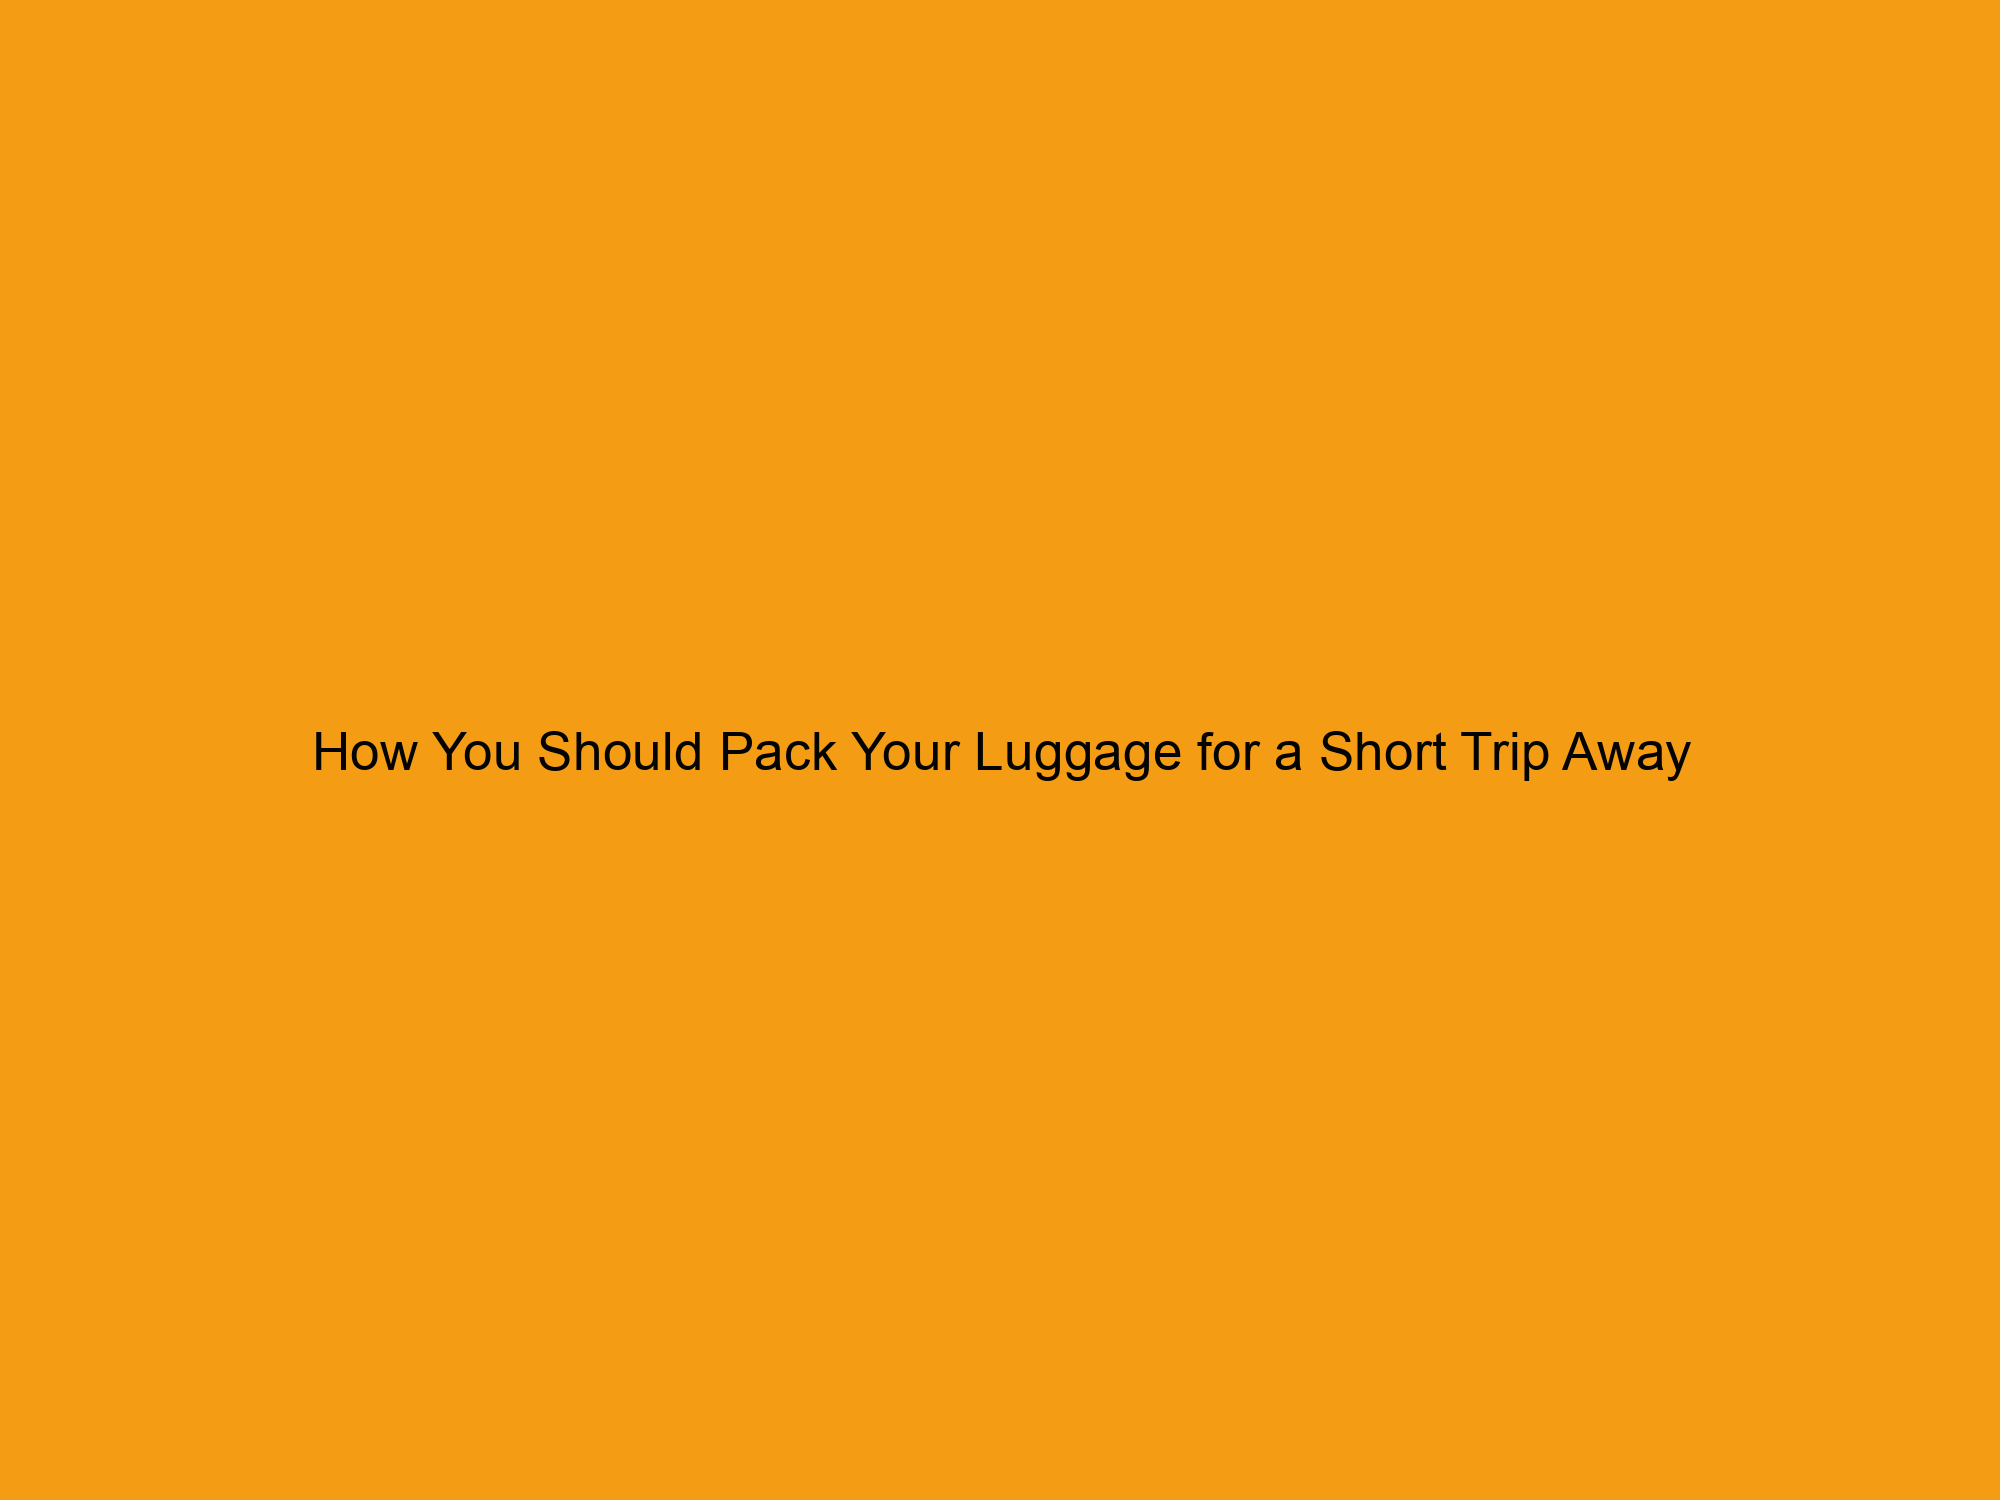 How You Should Pack Your Luggage for a Short Trip Away